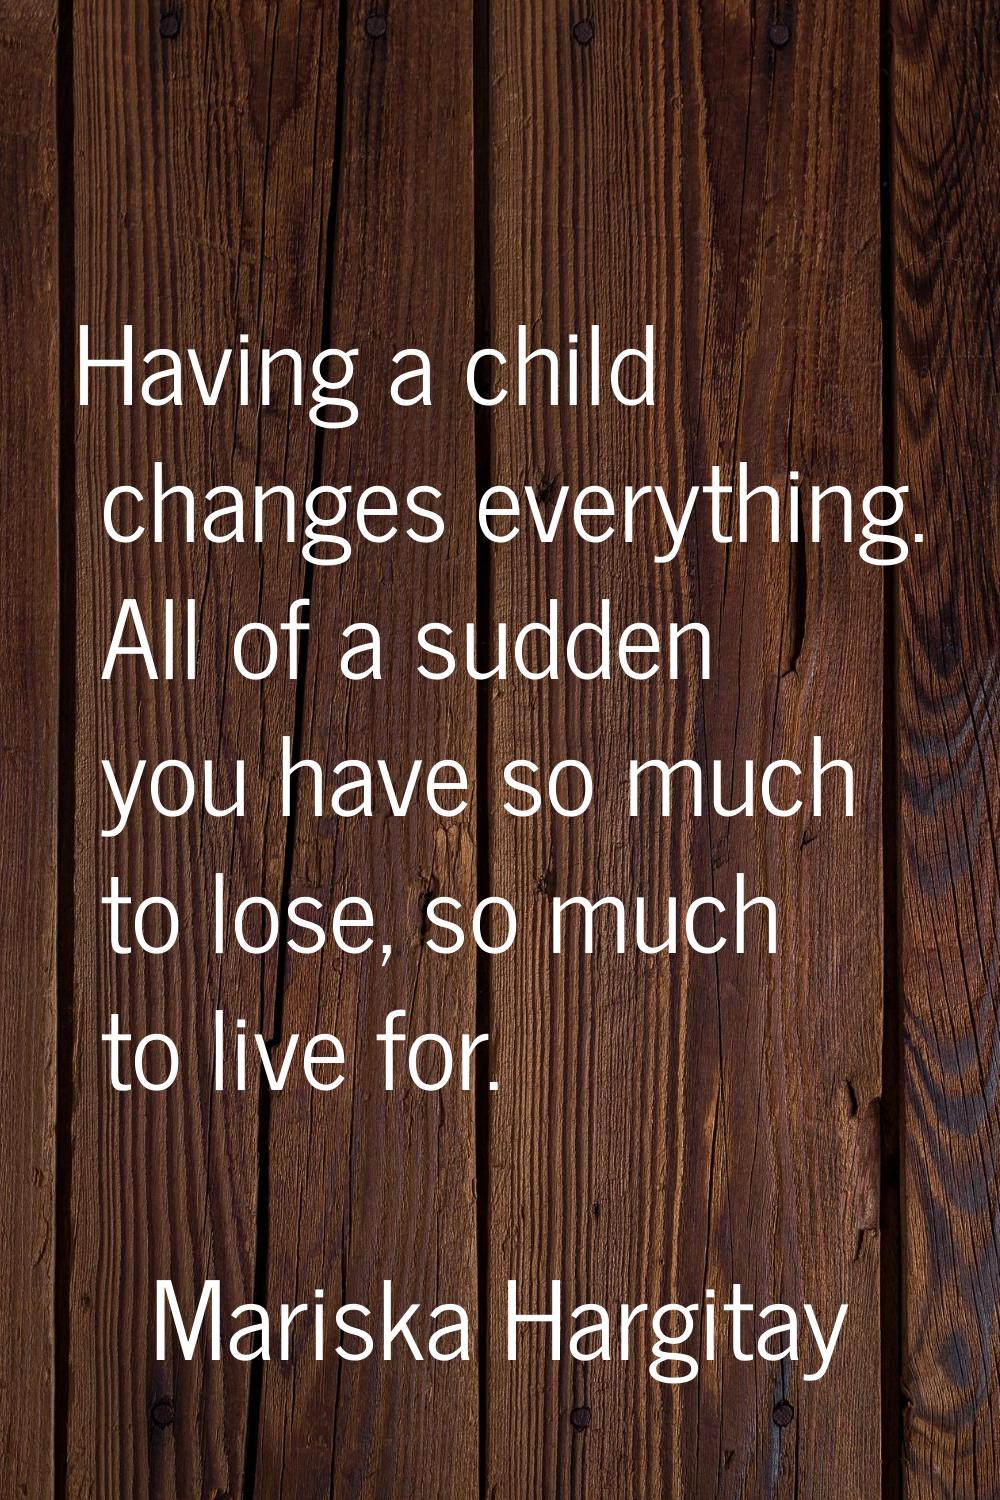 Having a child changes everything. All of a sudden you have so much to lose, so much to live for.